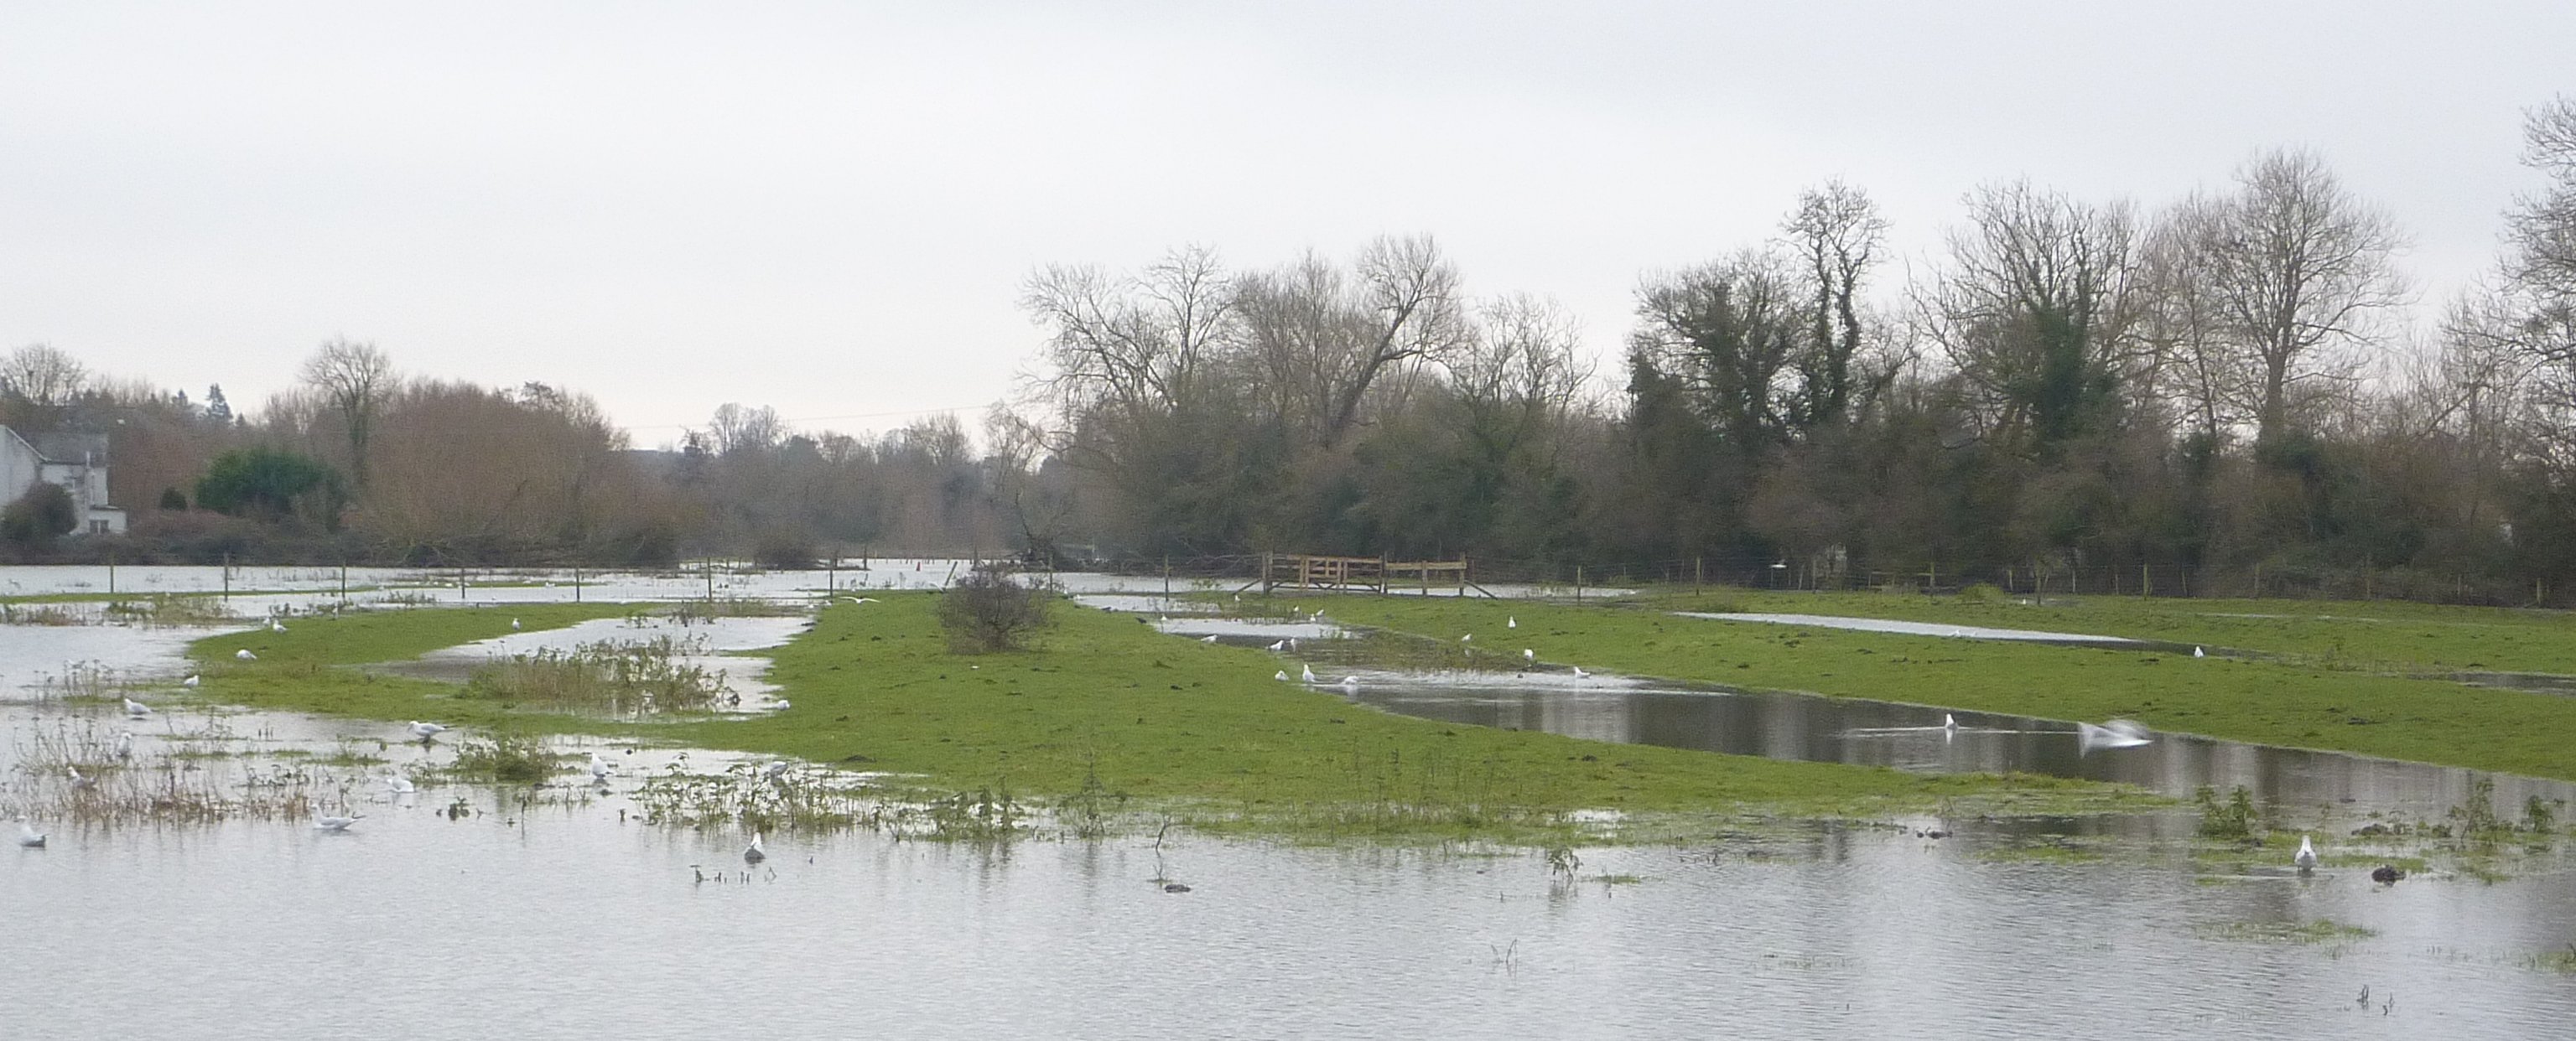 Flooding shows ridge and furrow in field behind Eastwyke farm between Abingdon Road and river 28-12-2020